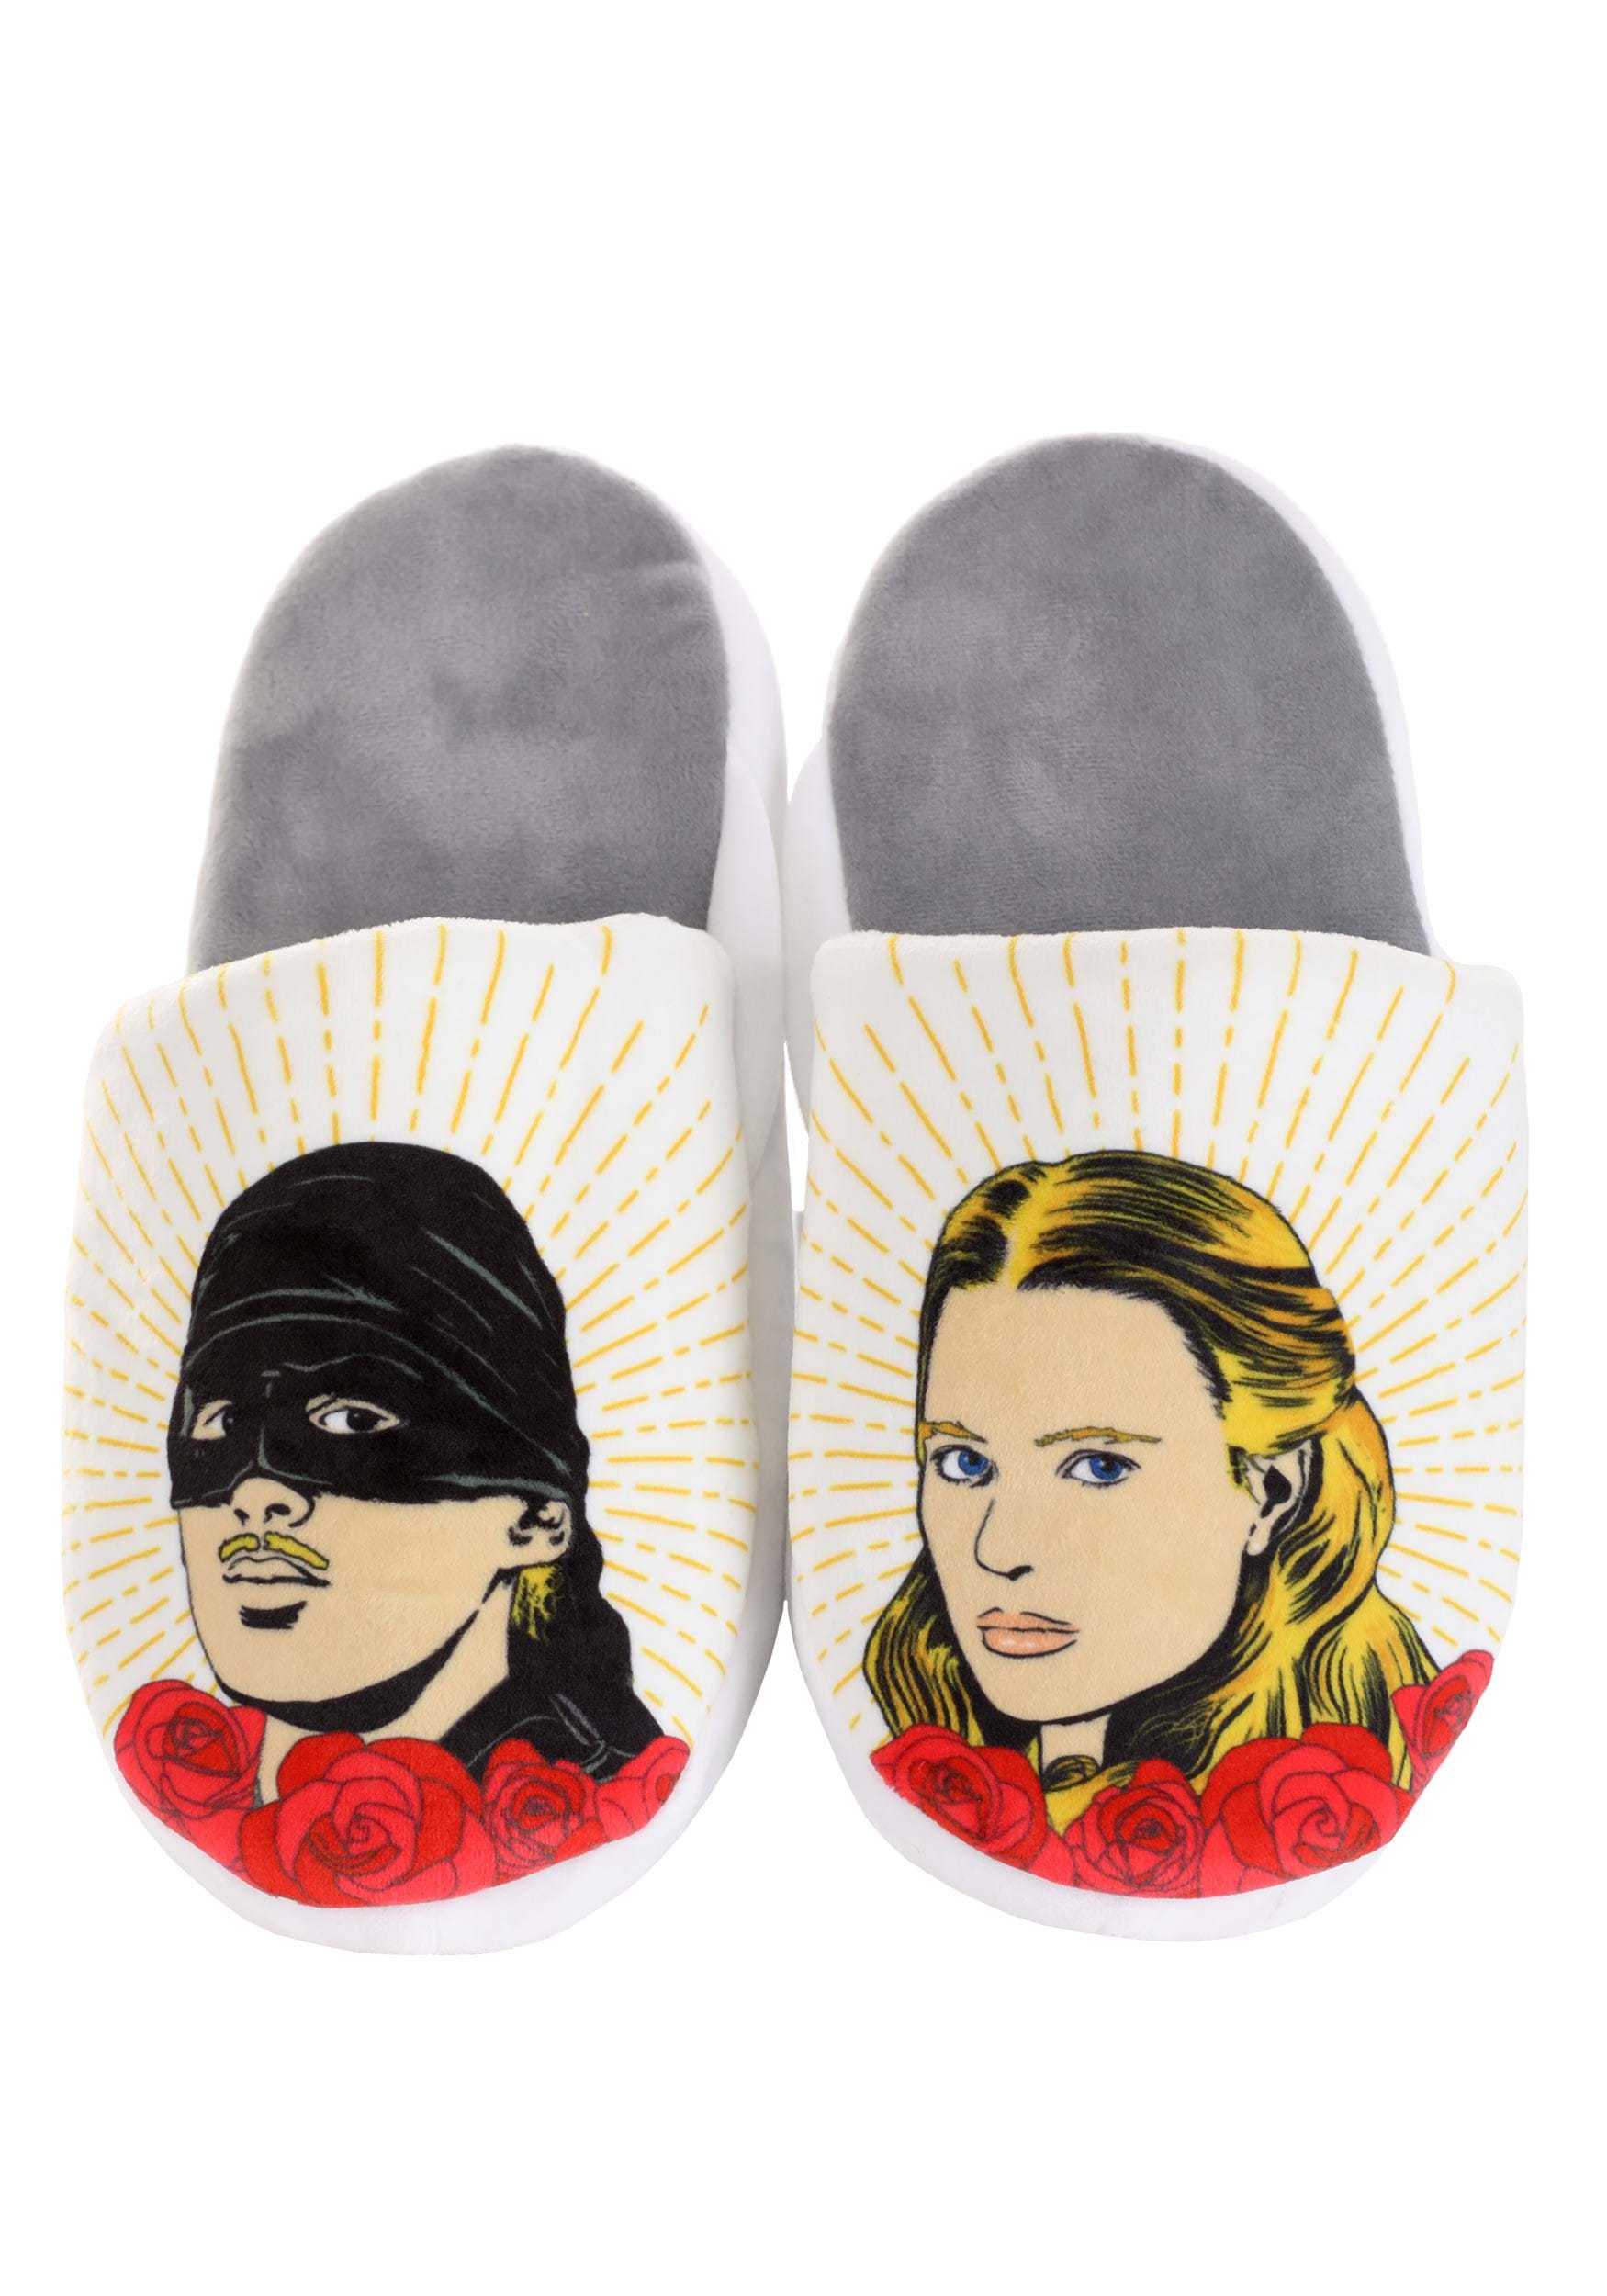 The Princess Bride As You Wish Adult Slippers